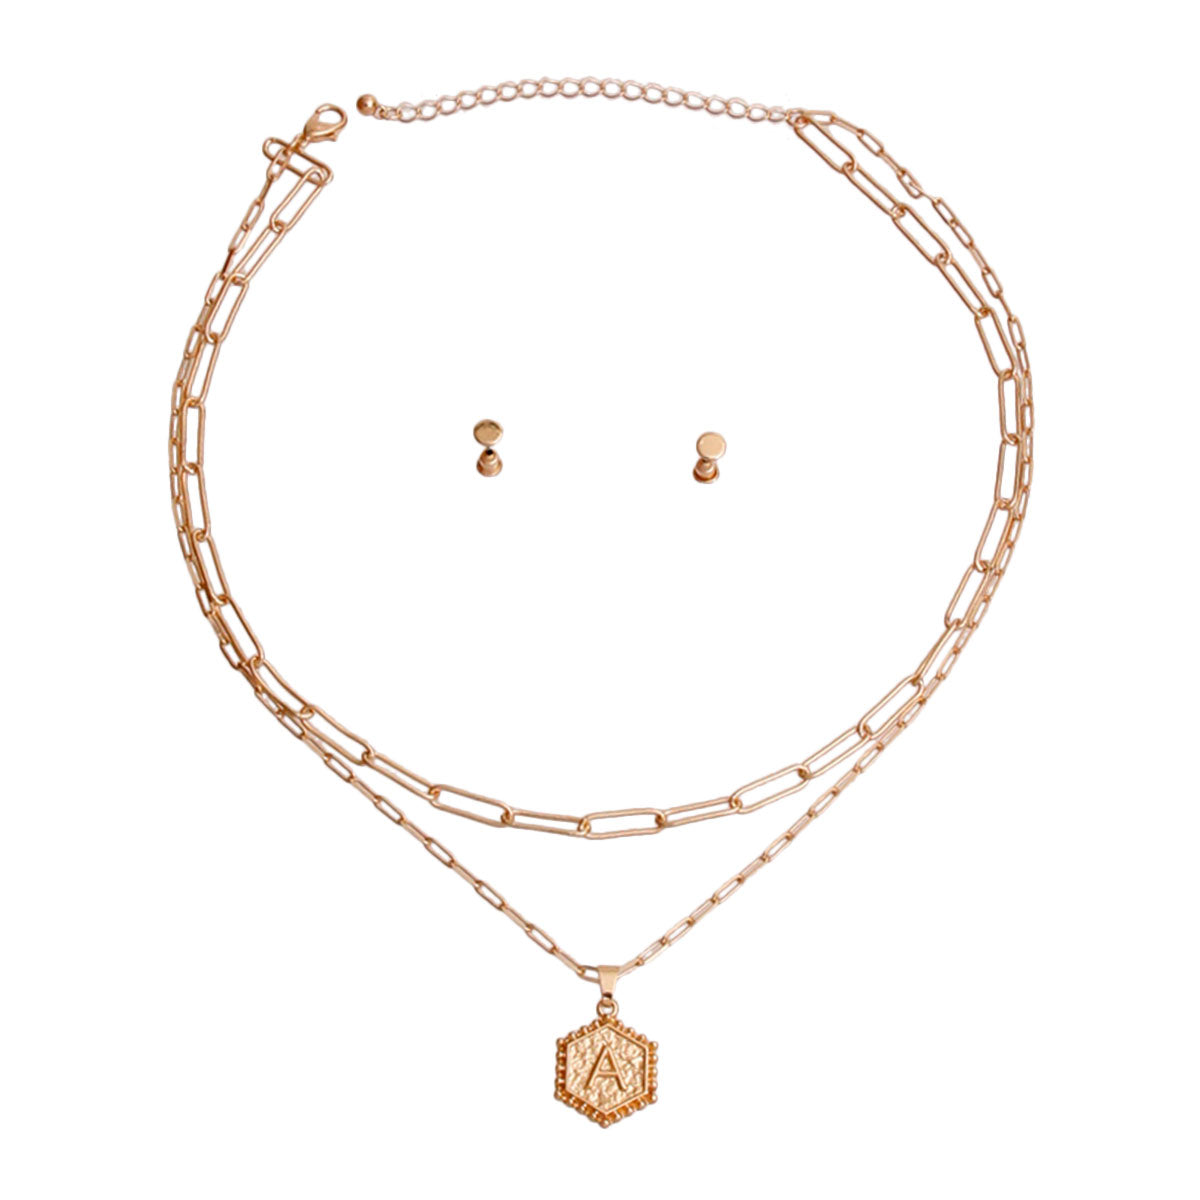 A Hexagon Initial Charm Necklace